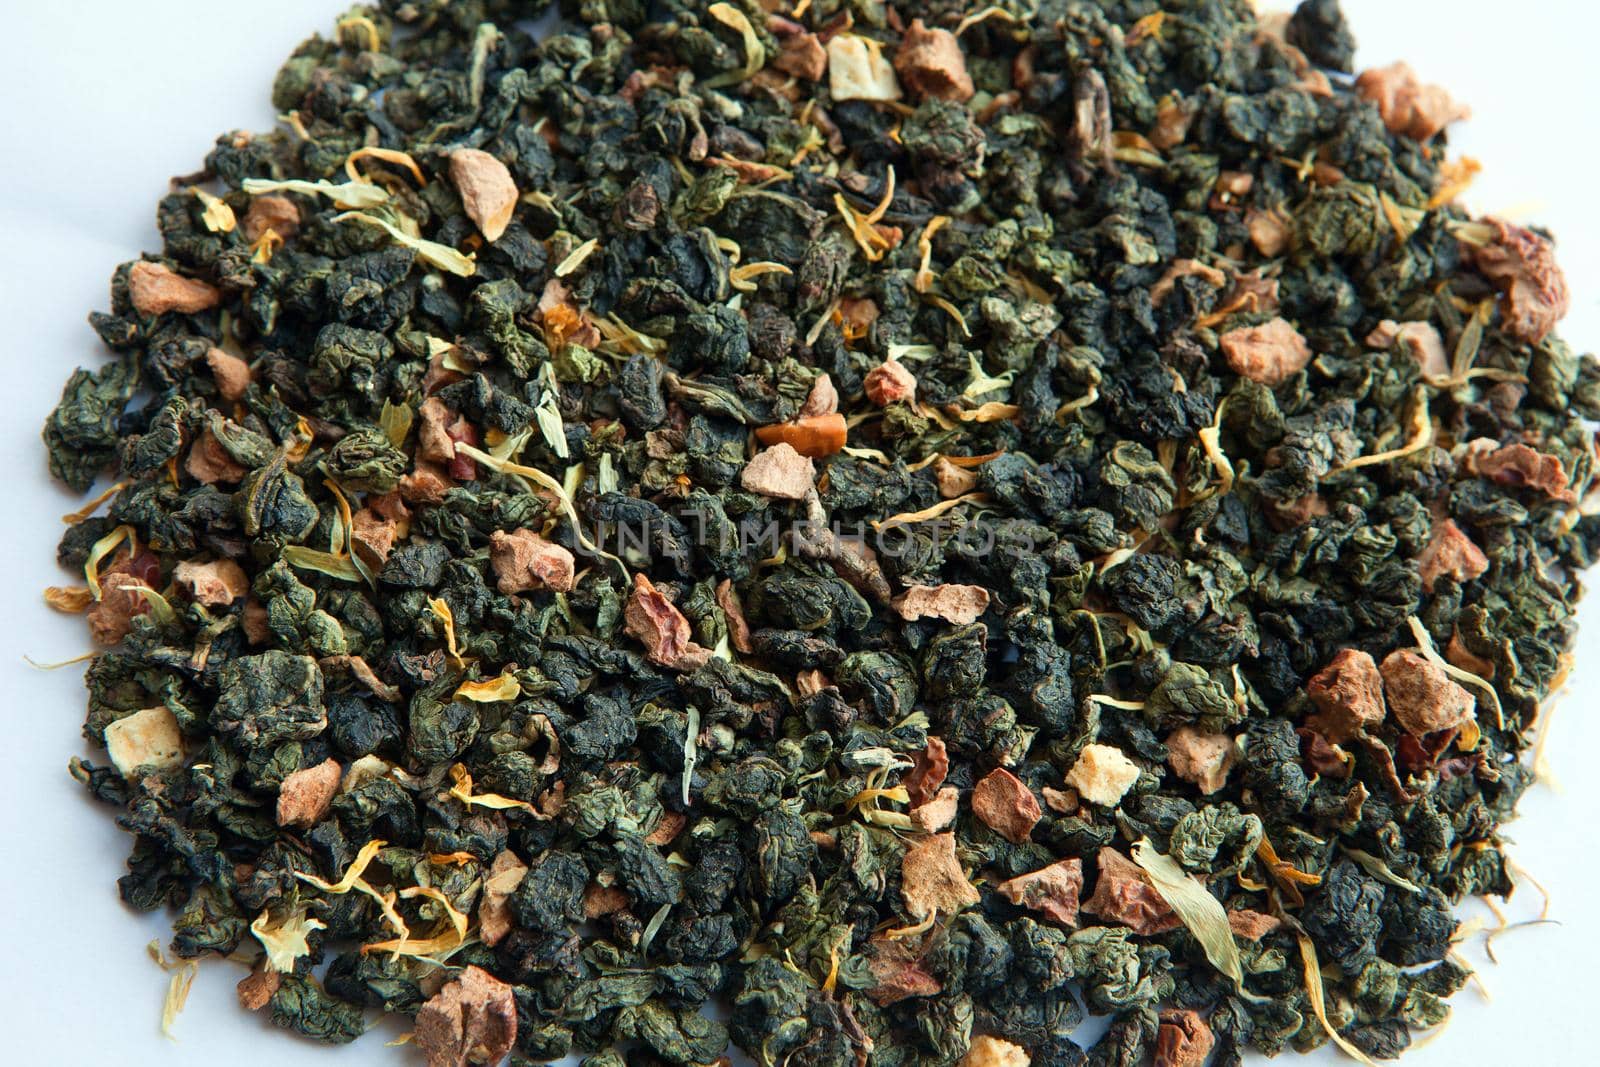 dried green tea leafs with peaches - Green fruit tea with dry peach and strawberry